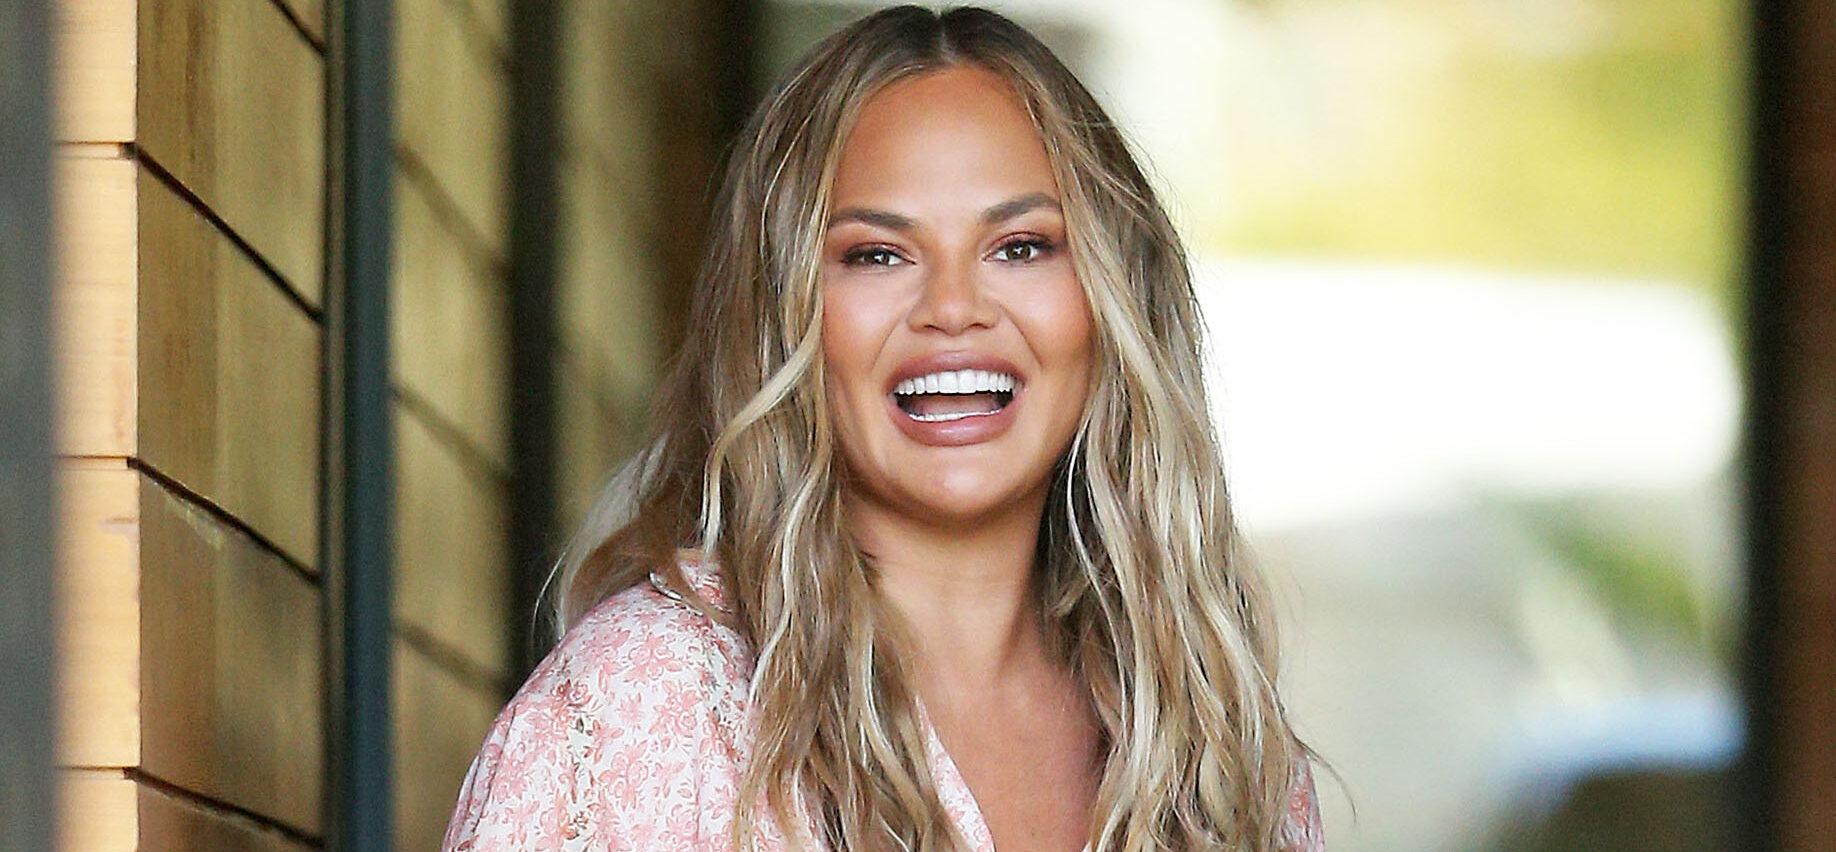 Chrissy Teigen Undergoes An Eyebrow Transplant Surgery, See The Results!